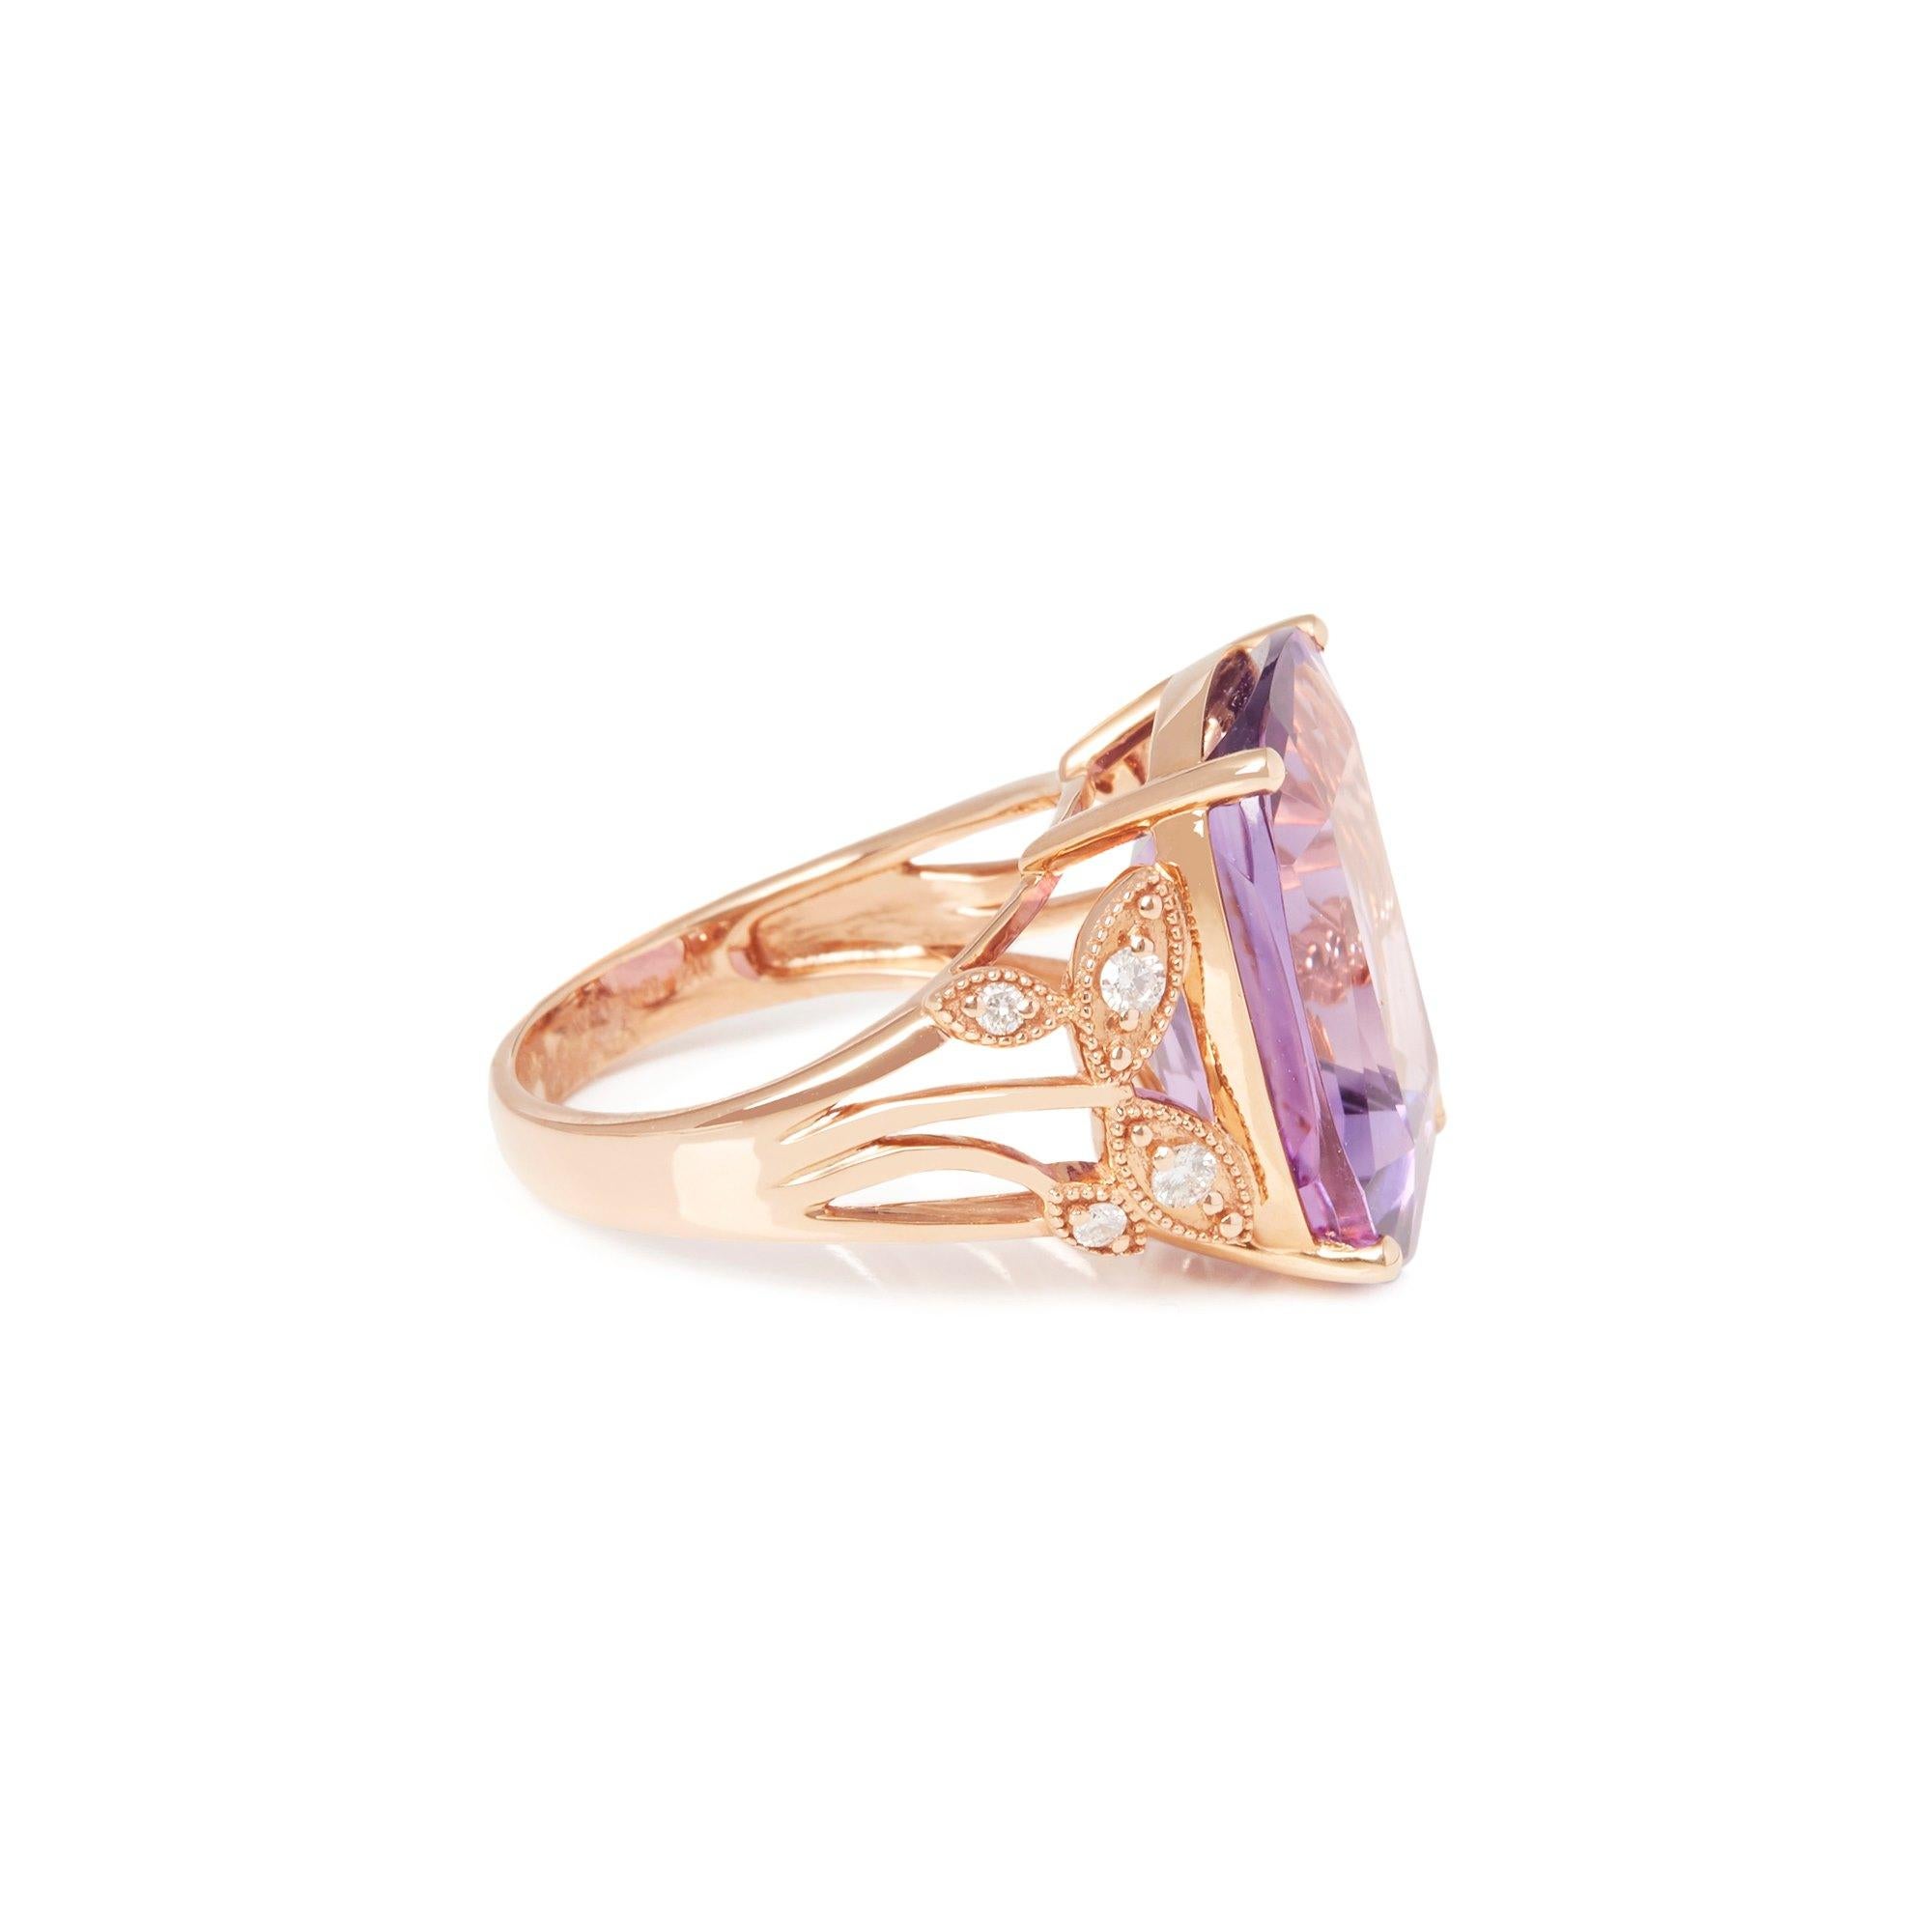 This ring designed by David Jerome is from his private collection and features one oval cut Amethyst totalling 12.74cts sourced in Russia. Set with round brilliant cut Diamonds totalling 0.30cts mounted in an 18k yellow gold setting. UK finger size